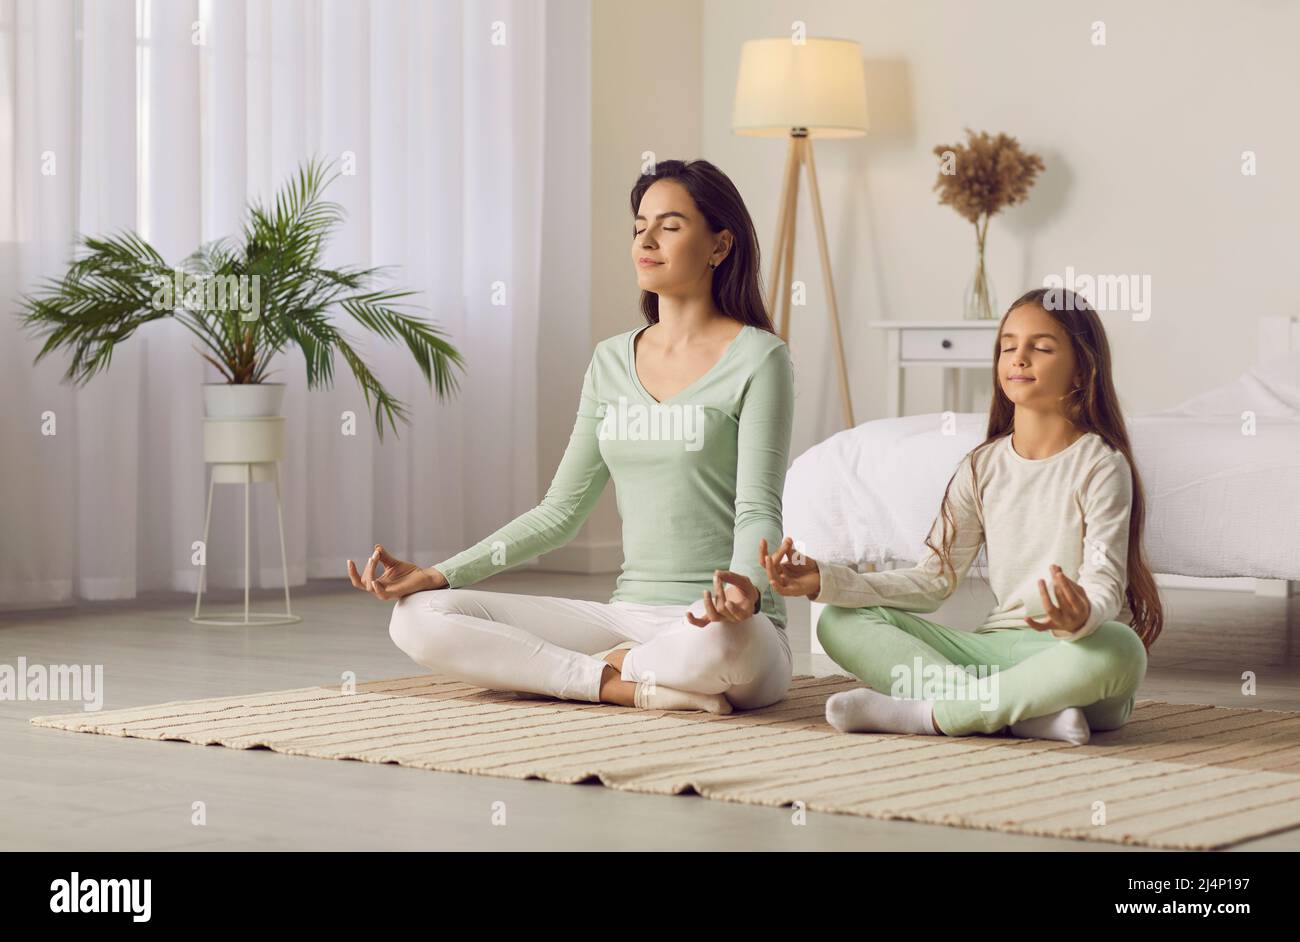 Beautiful woman and her little daughter are smiling while doing yoga together at home. Stock Photo